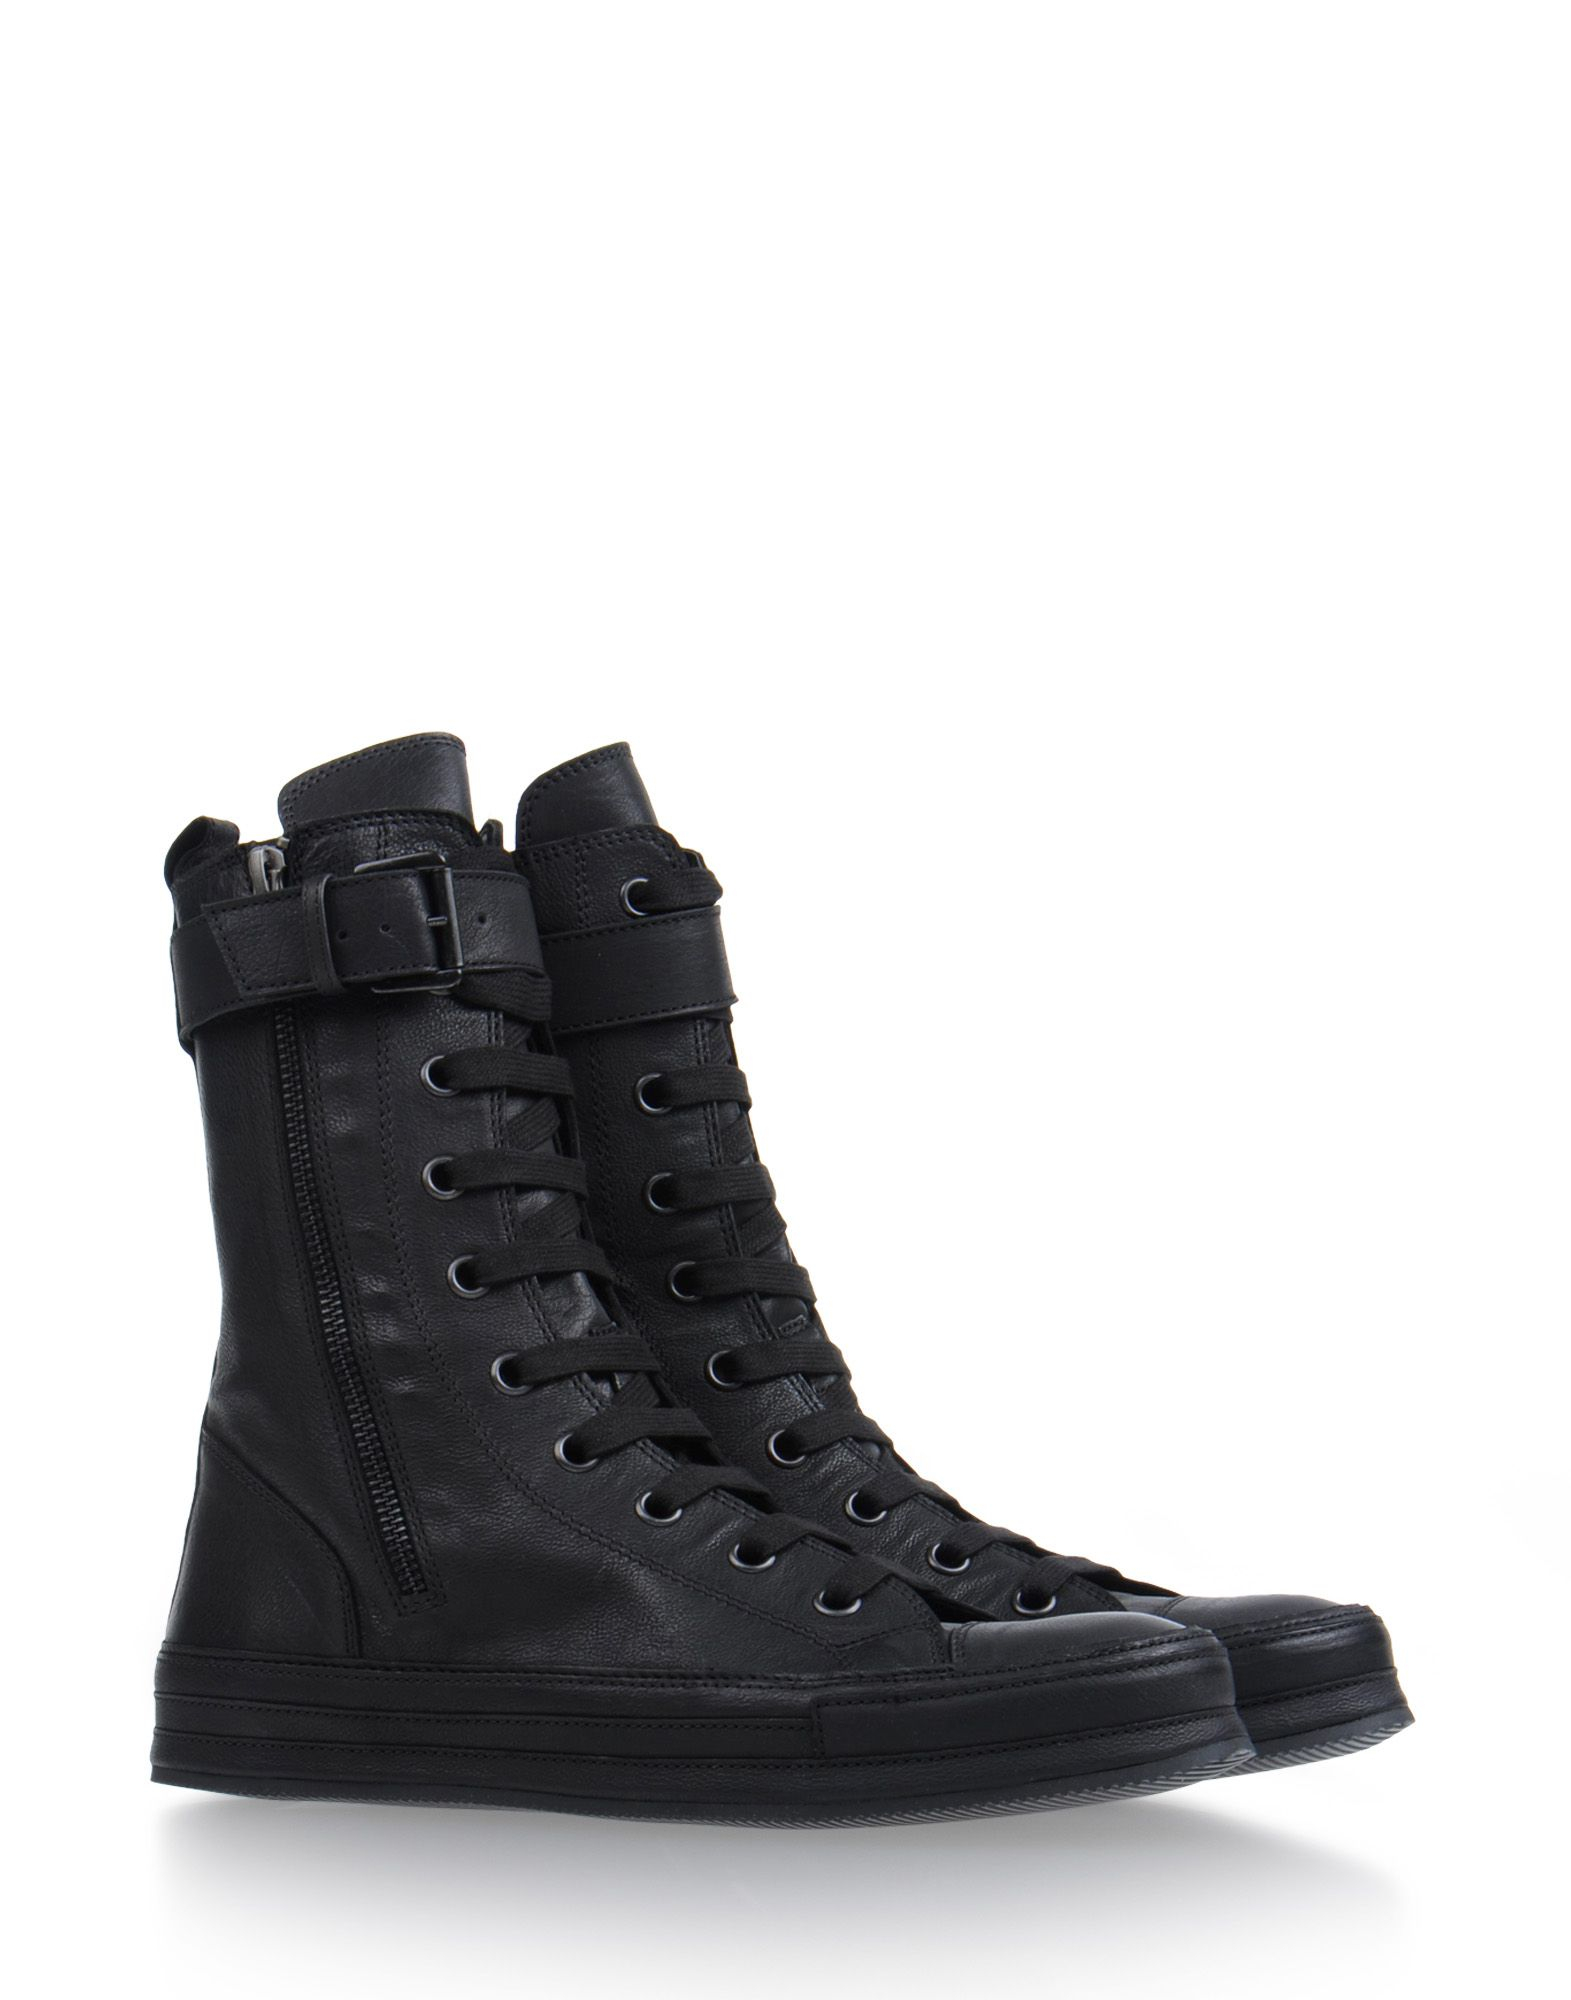 Ann Demeulemeester Leather High-top Sneakers in Black - Lyst